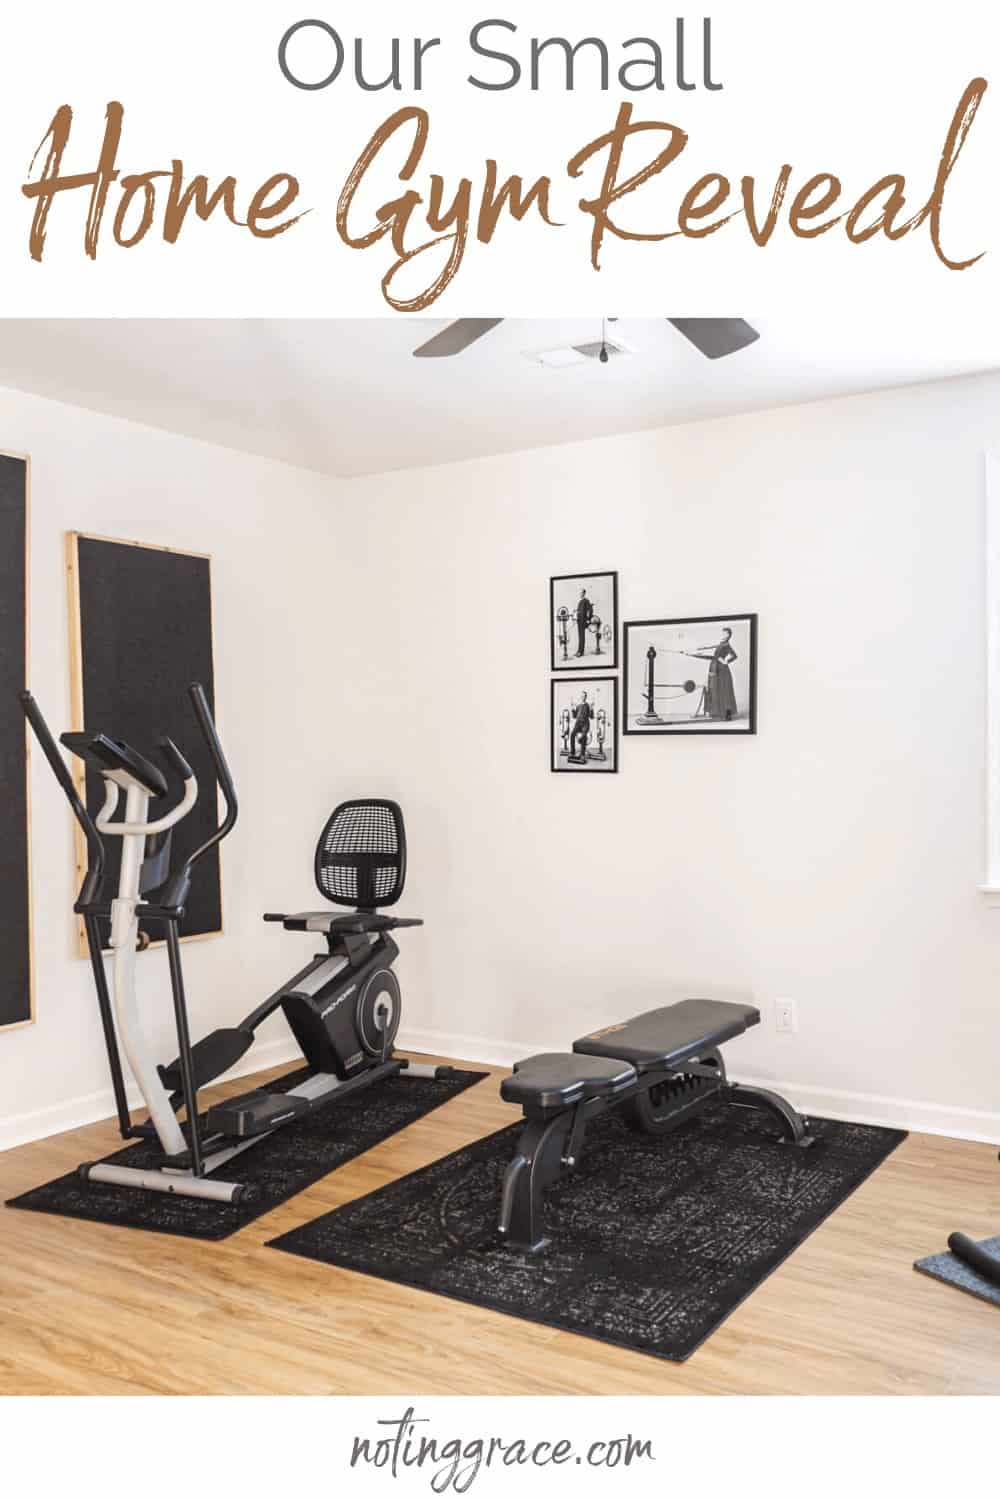 Our Small Home Gym Reveal